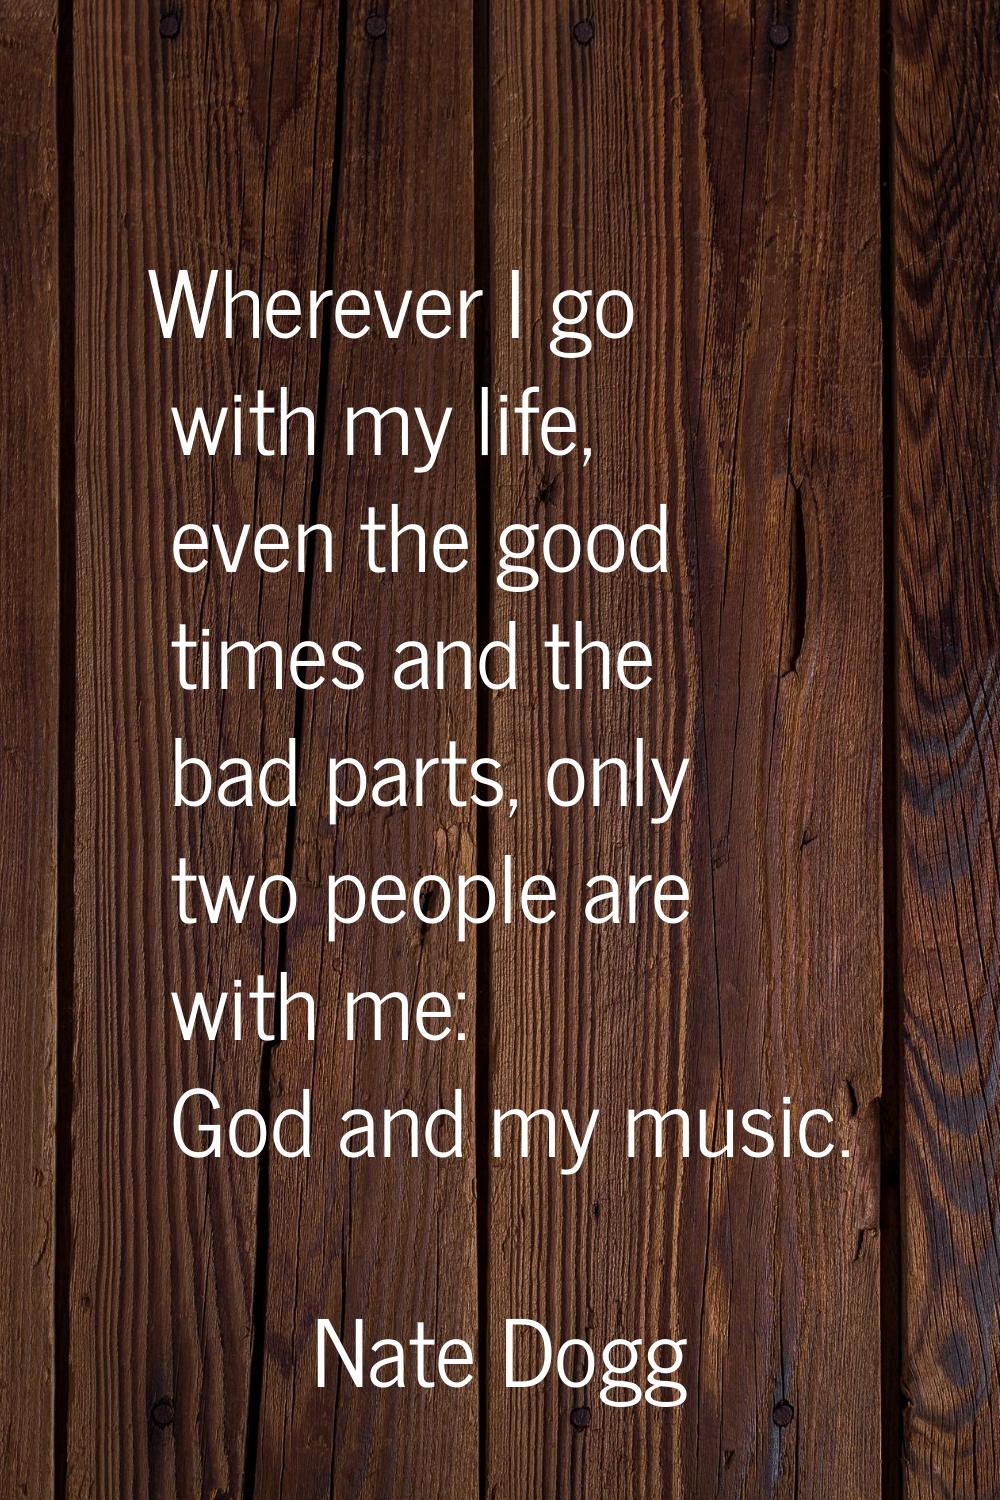 Wherever I go with my life, even the good times and the bad parts, only two people are with me: God